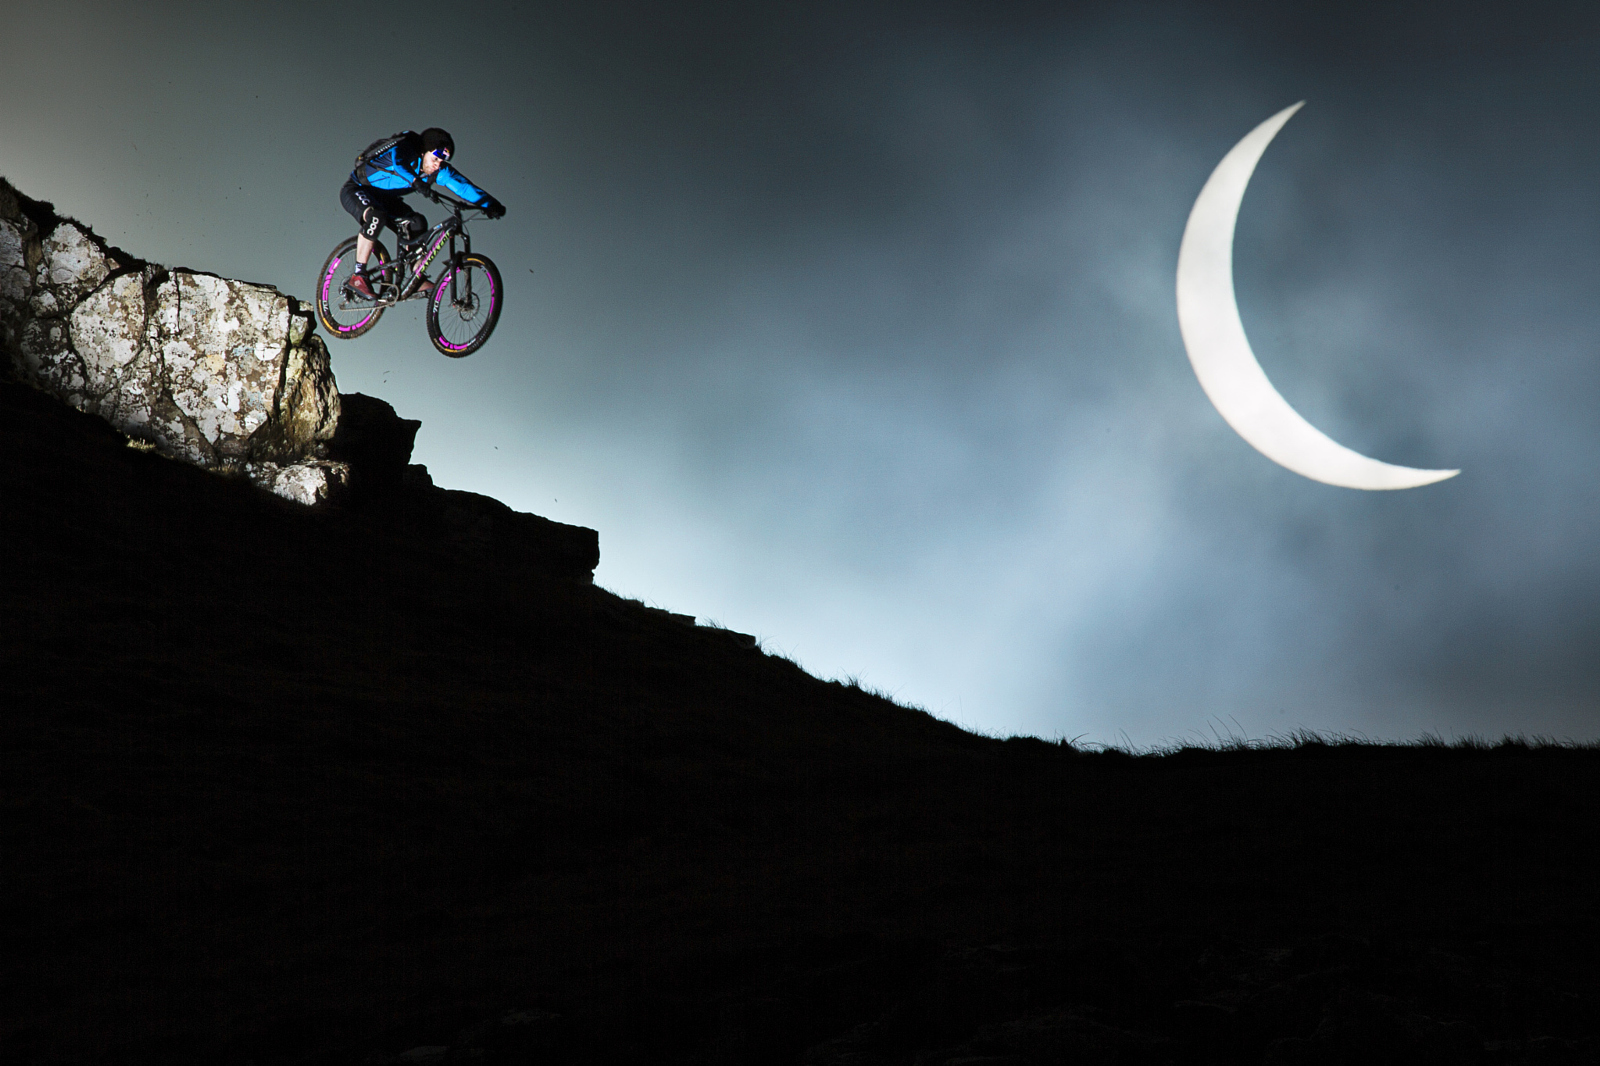 Astrophotography In Action: 10 Sports Photos Shot Under Celestial Objects